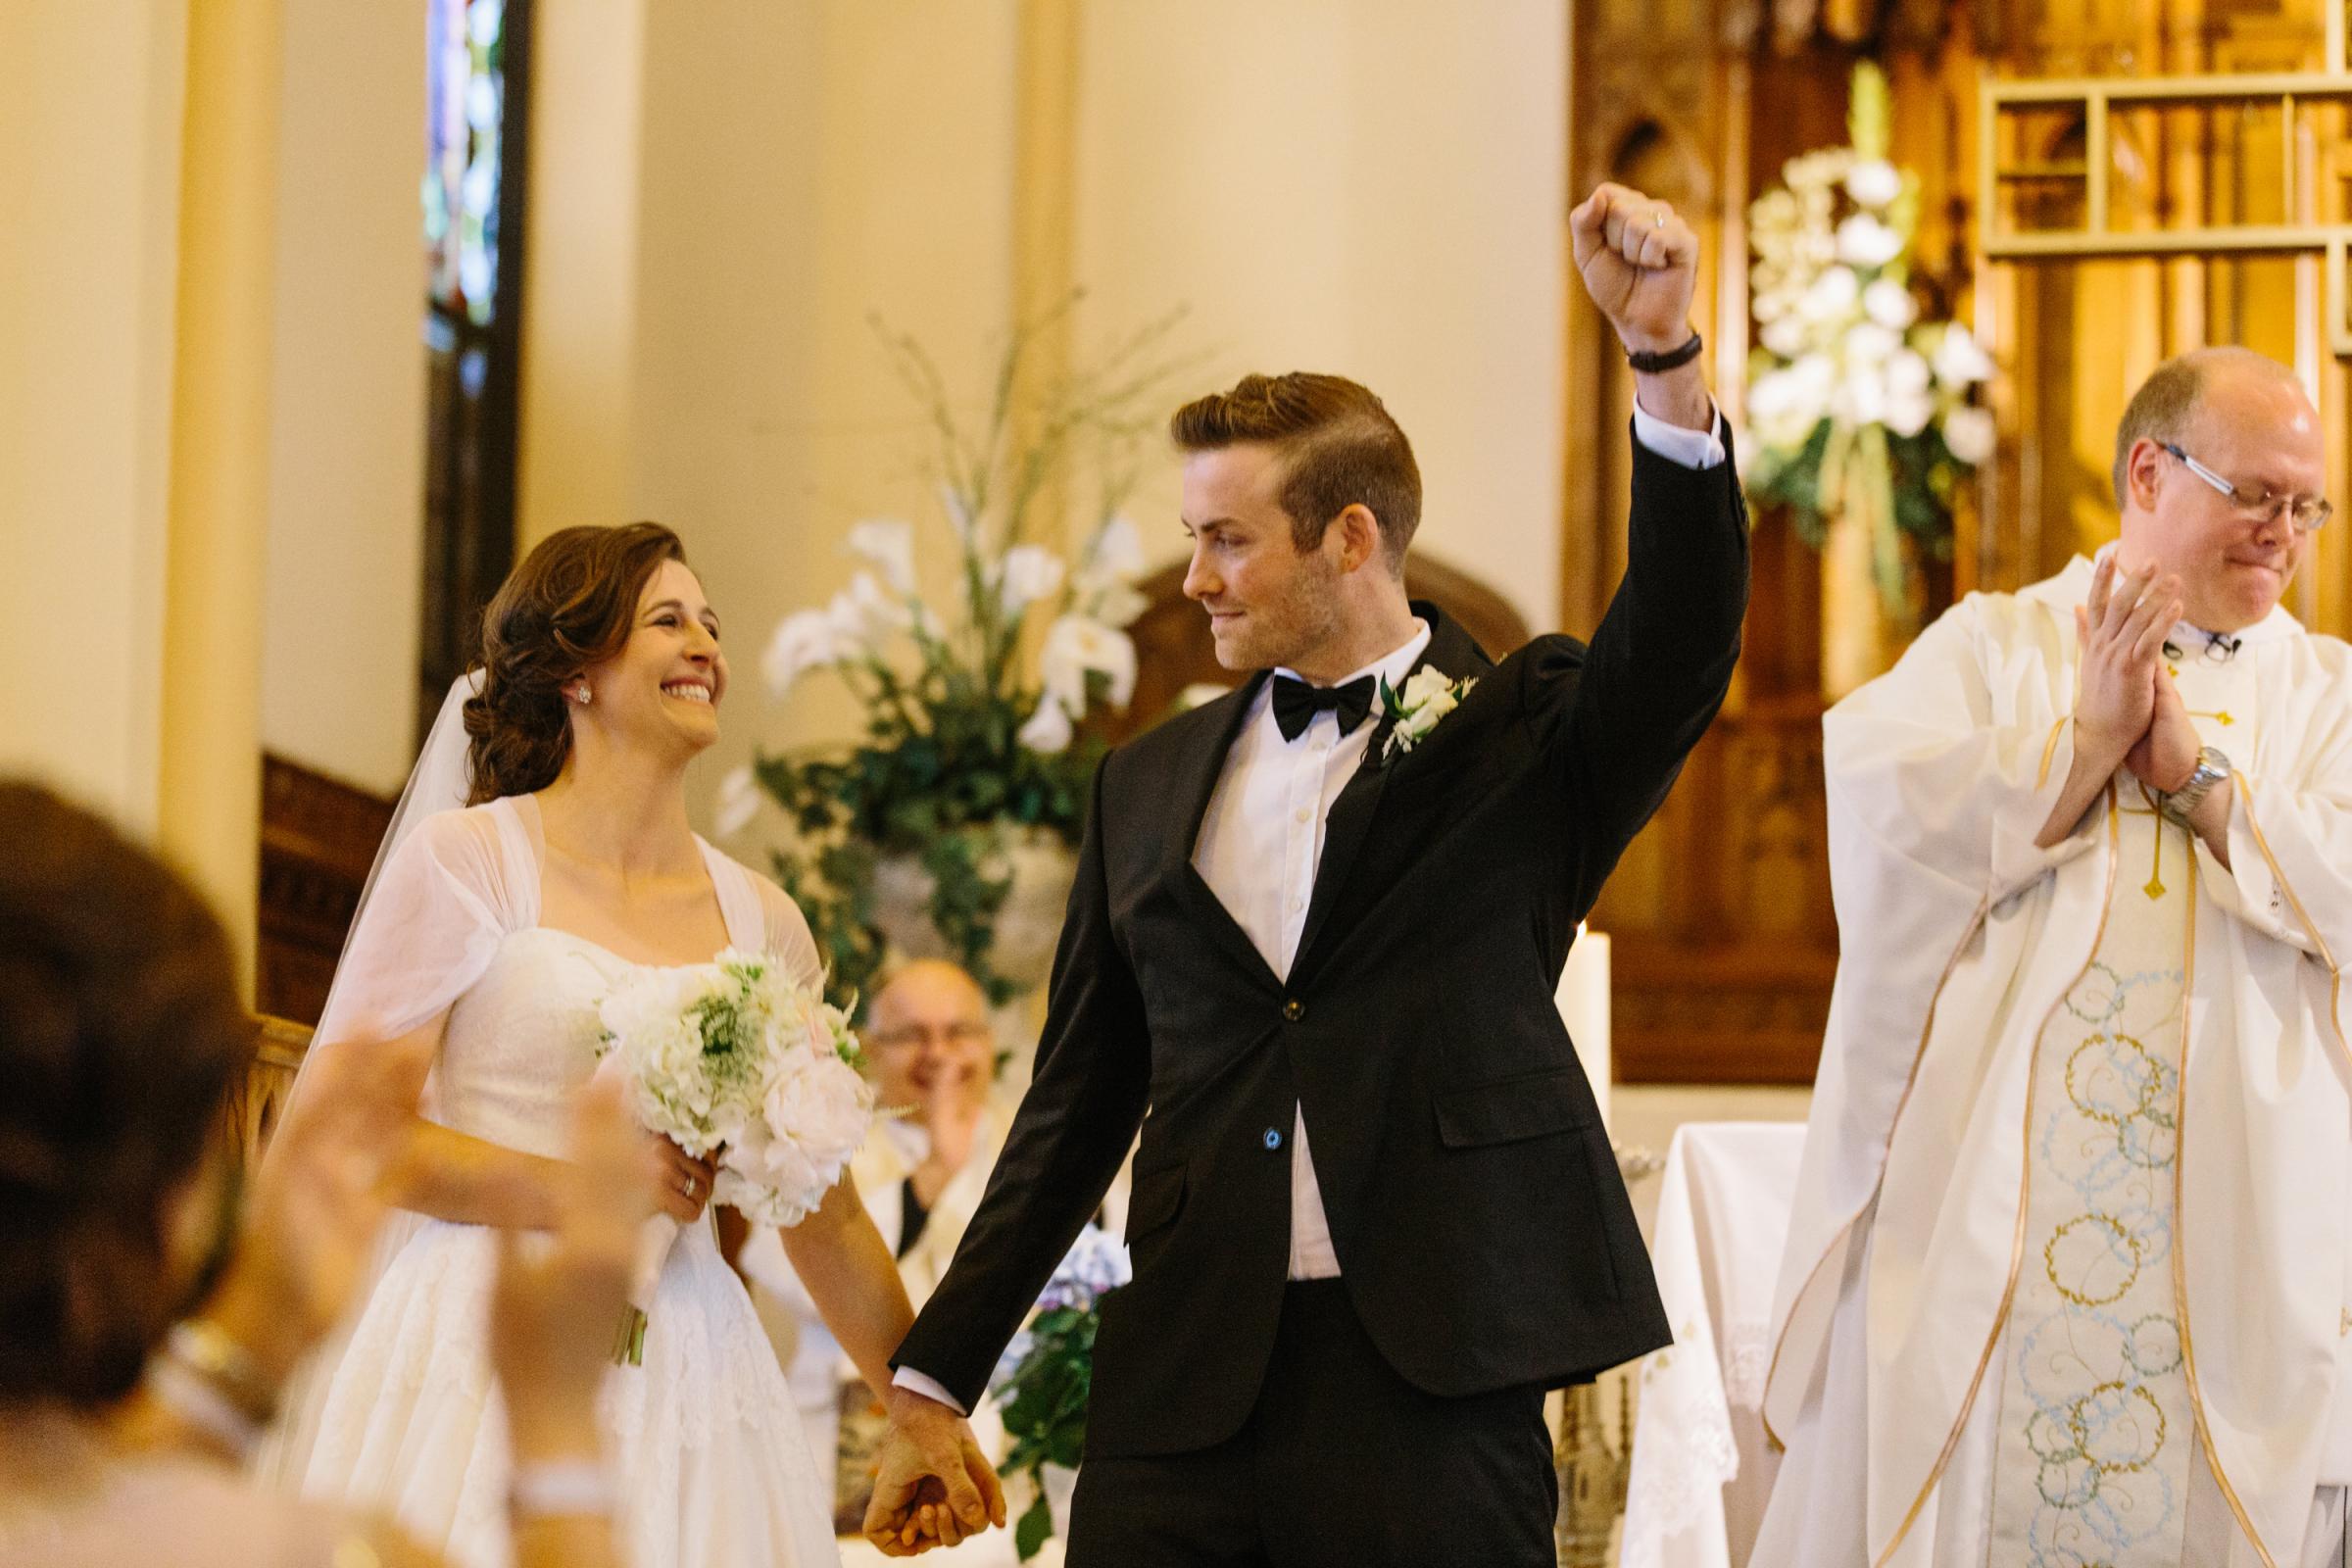 Marriage: The Opposite of Boring | Canadian Catholic